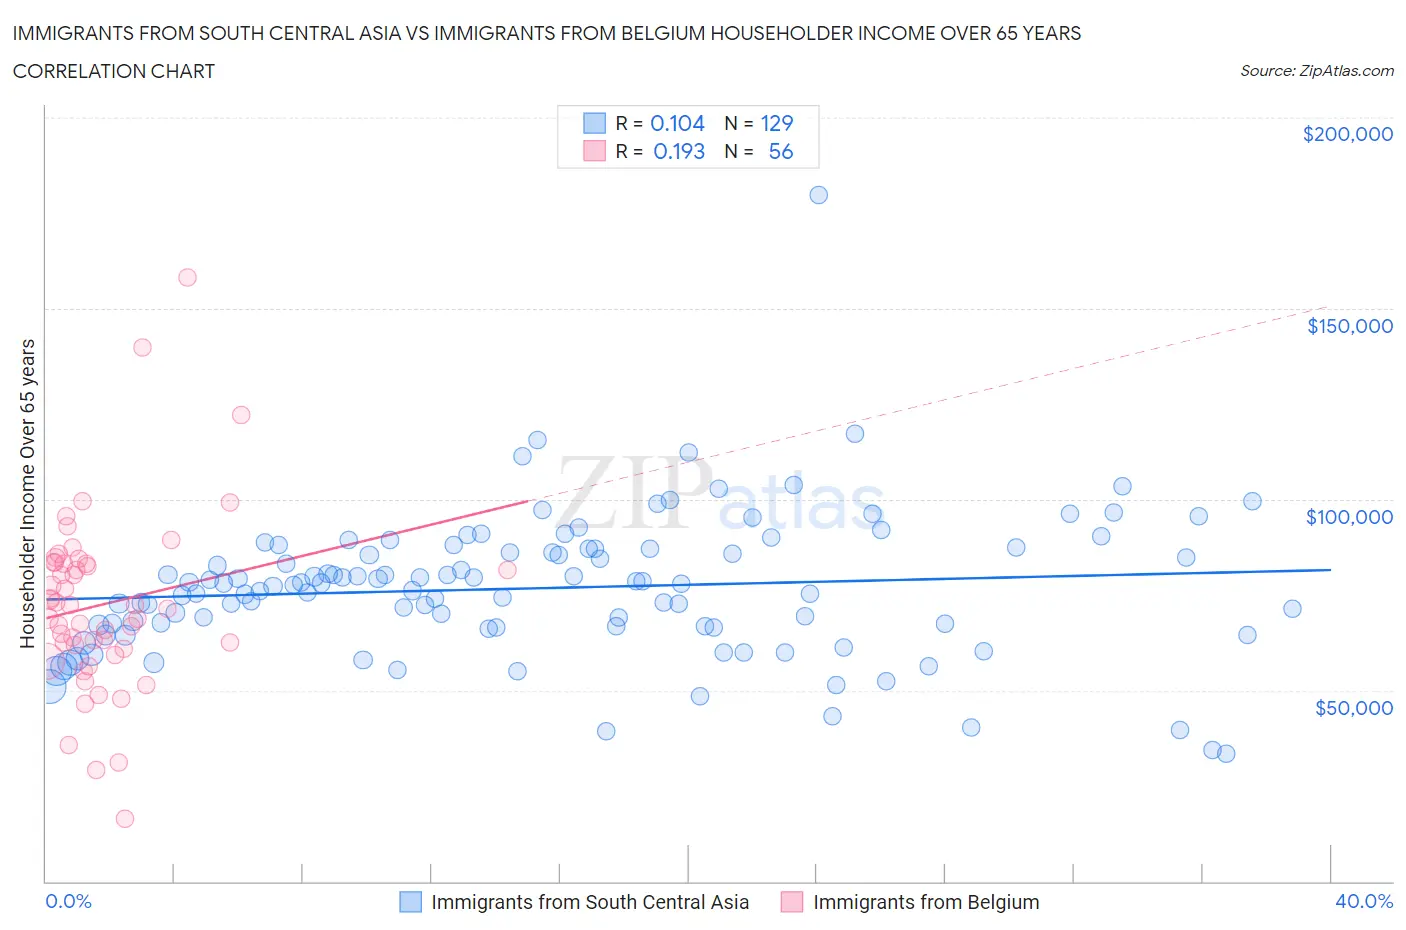 Immigrants from South Central Asia vs Immigrants from Belgium Householder Income Over 65 years